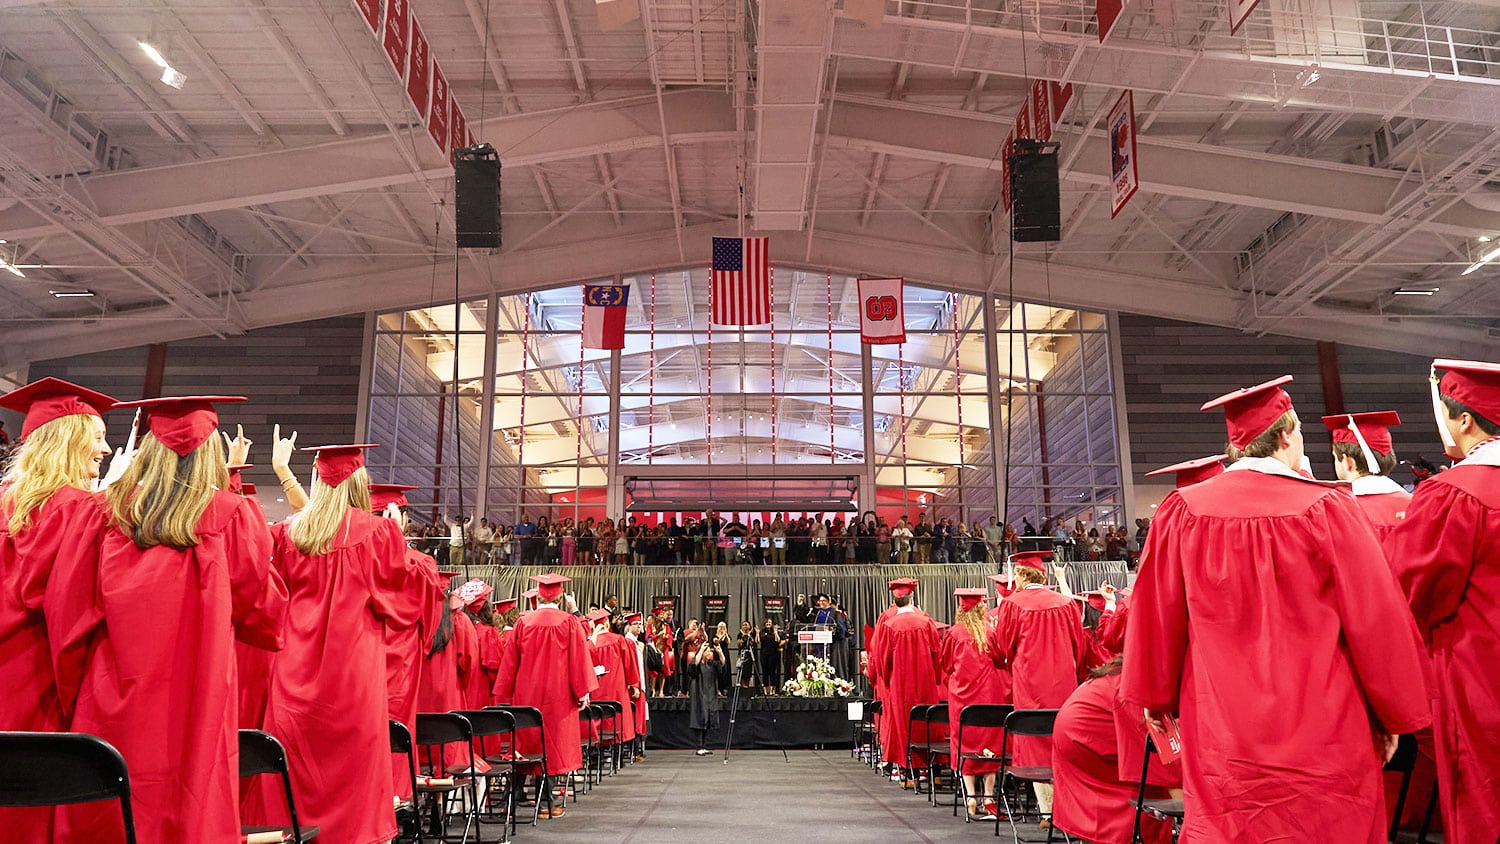 Students wearing red caps and gowns stand during the Poole College of Management's graduation ceremony in Reynolds Coloseum.